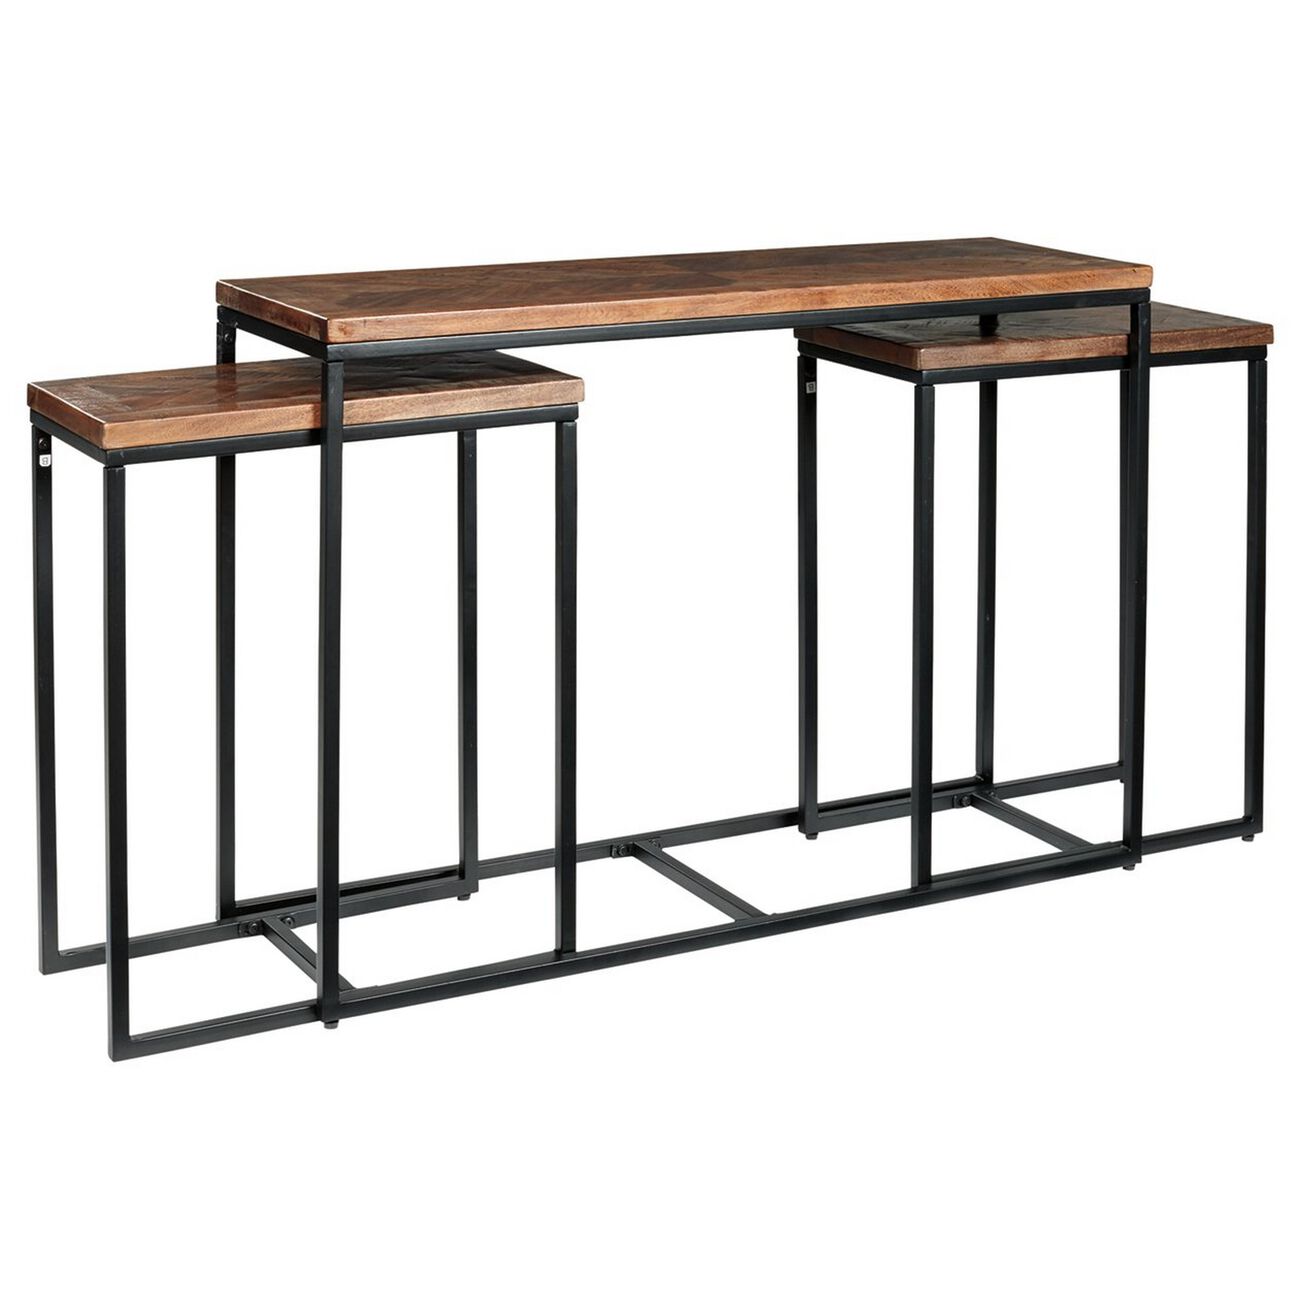 Wooden Nesting Console Table with Metal Frame Base,Set of 3,Black and Brown